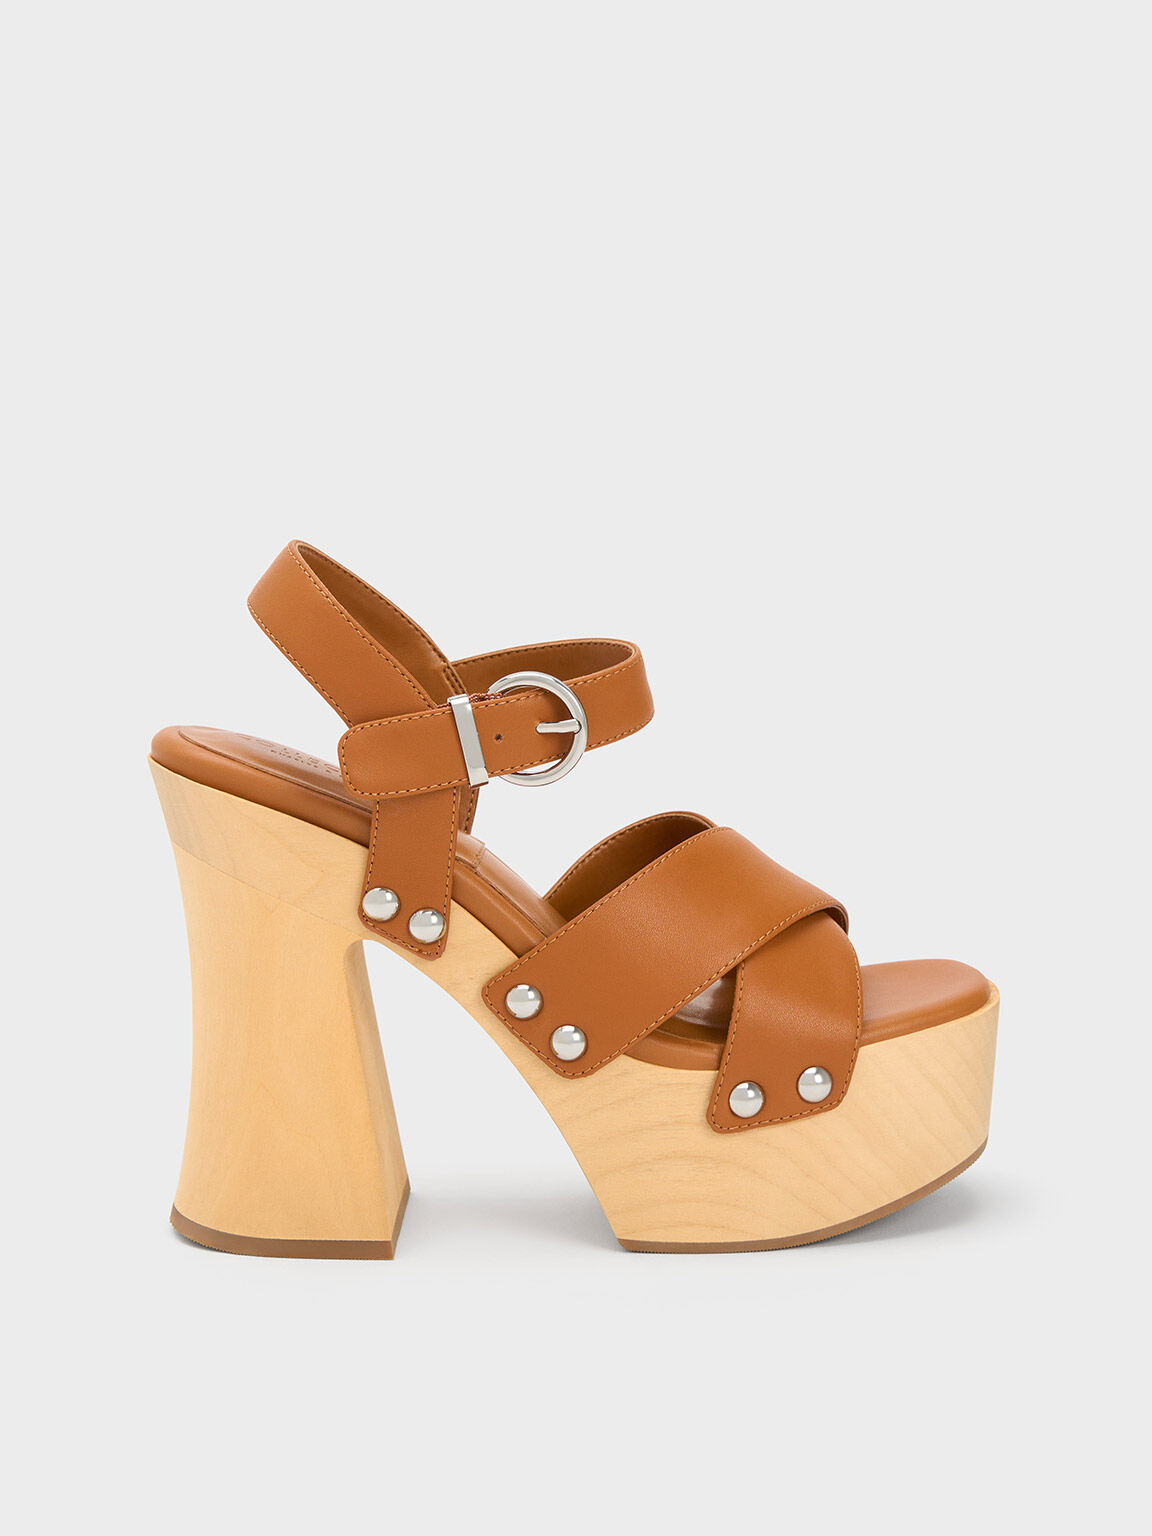 Sandal Crossover Leather Tabitha, Brown, hi-res